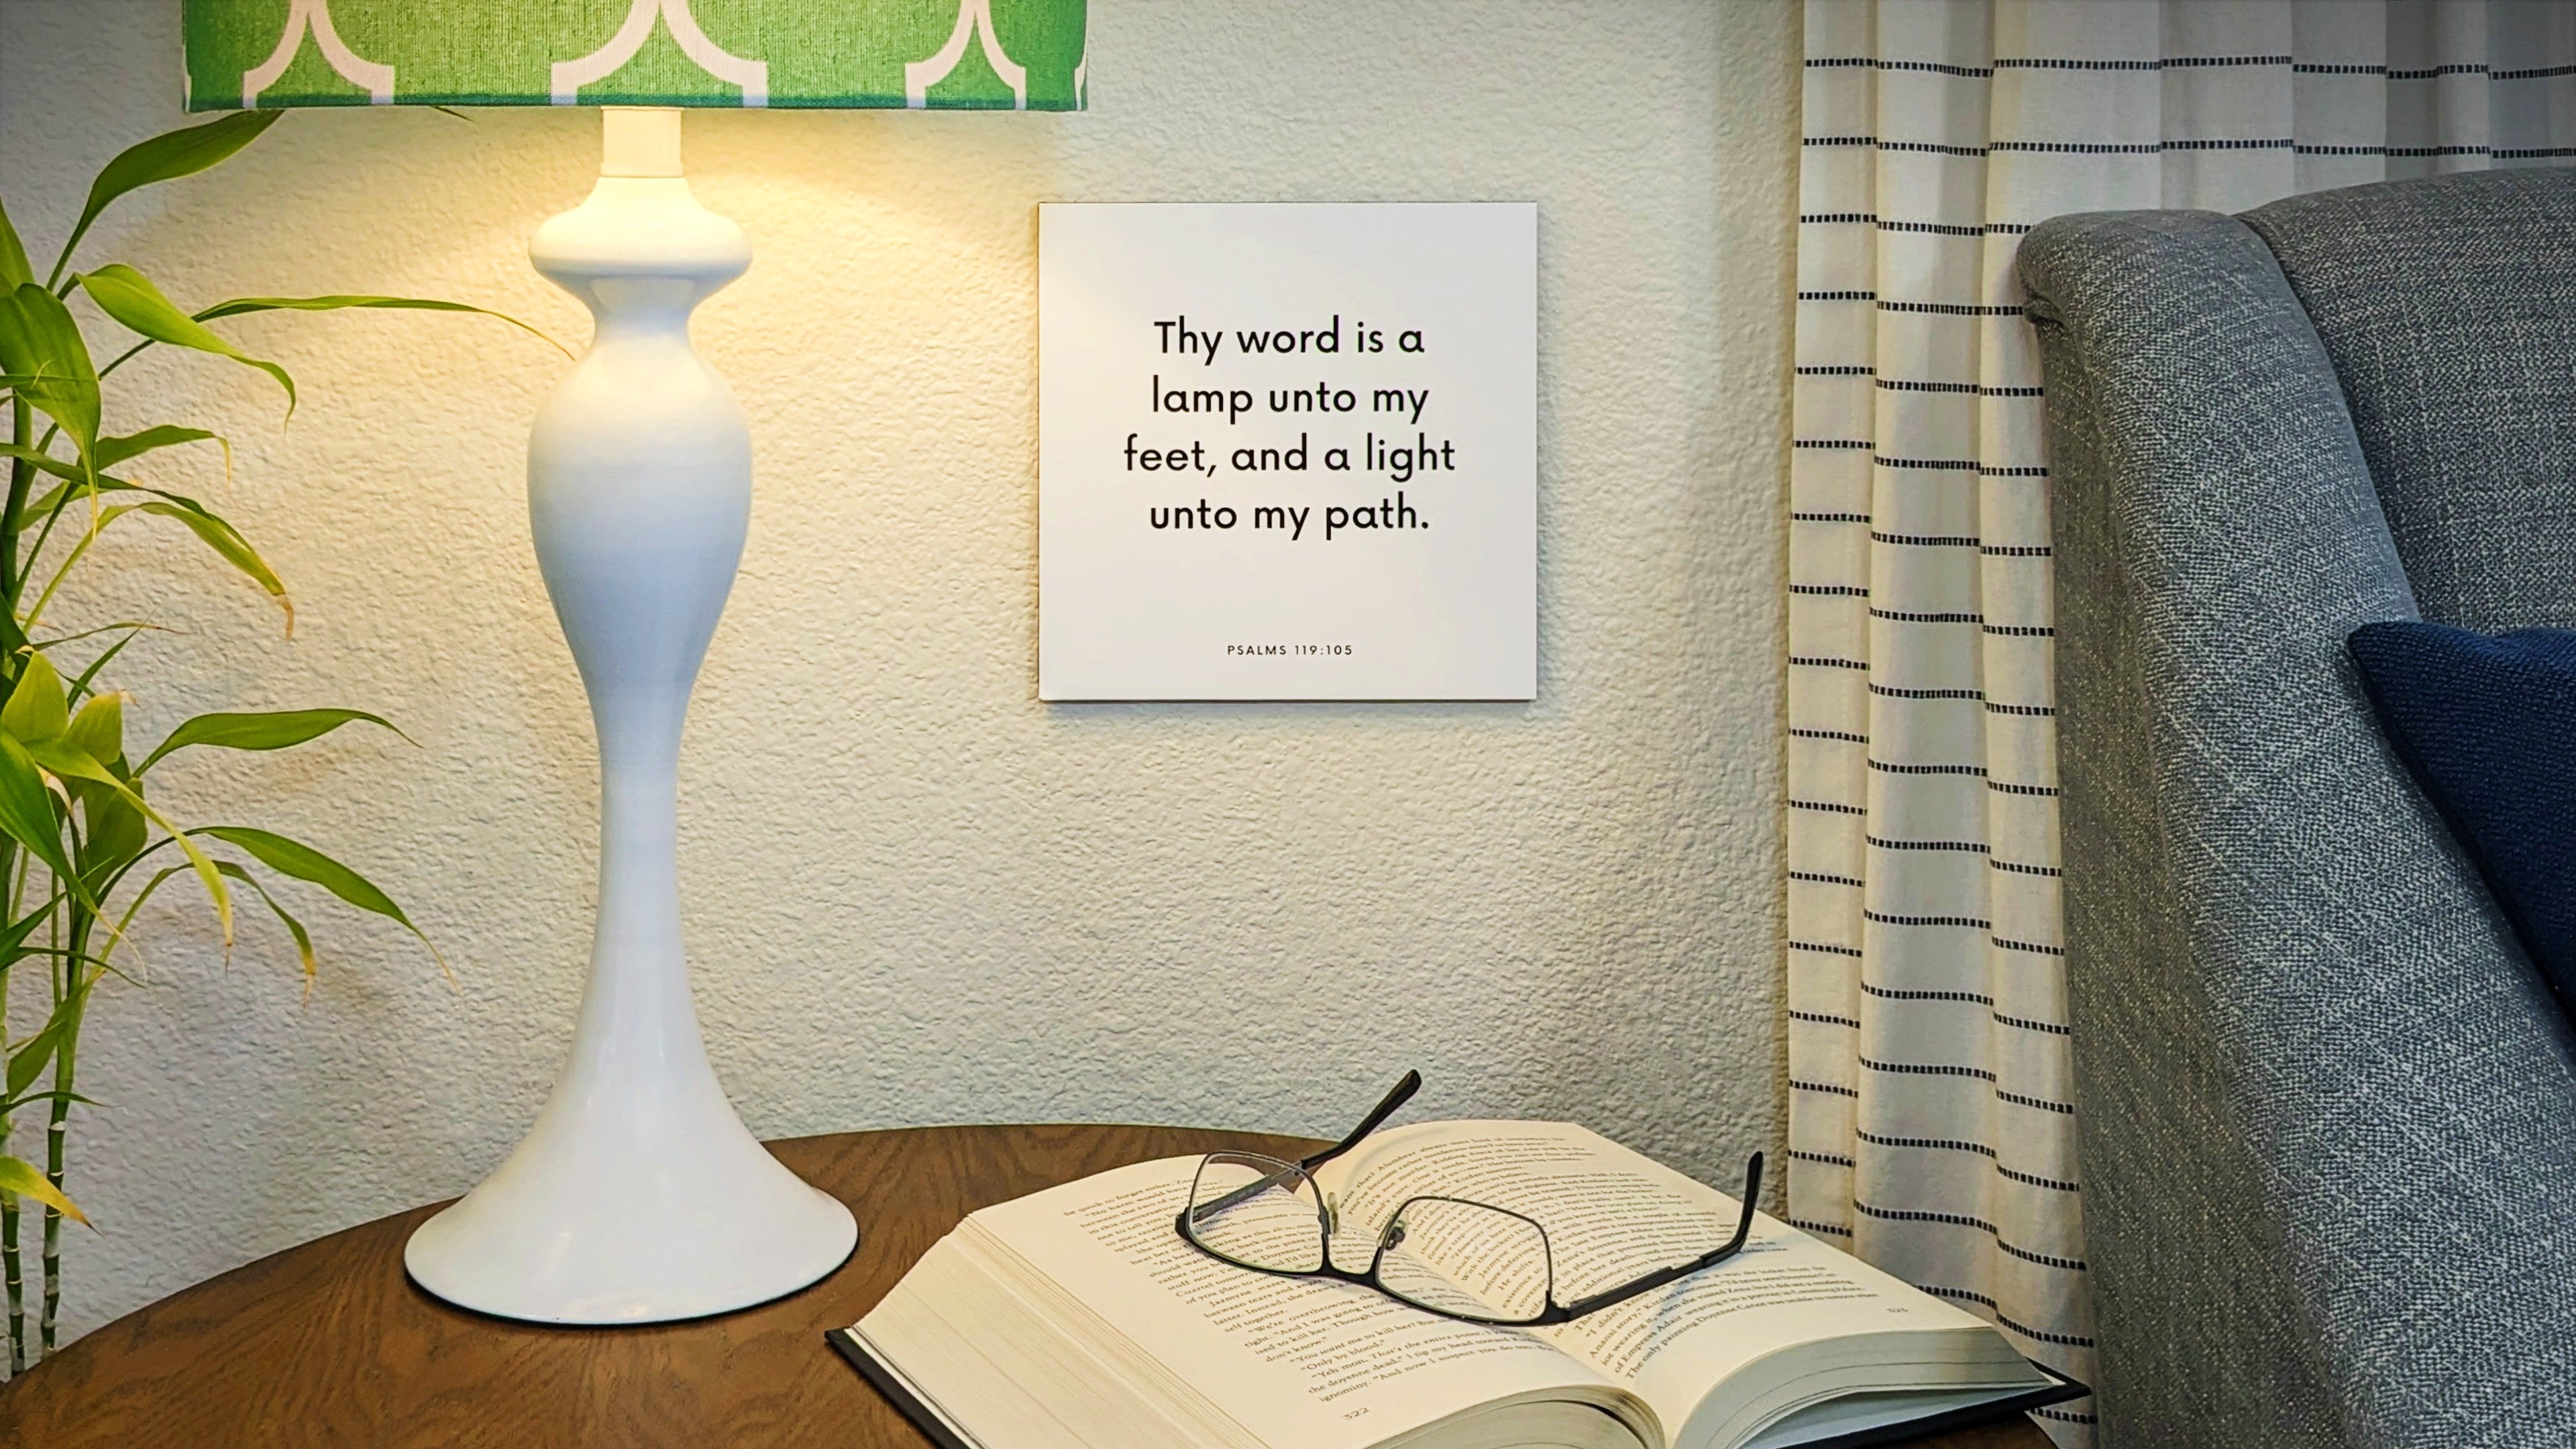 Lamp and end table with a scripture tile on the wall